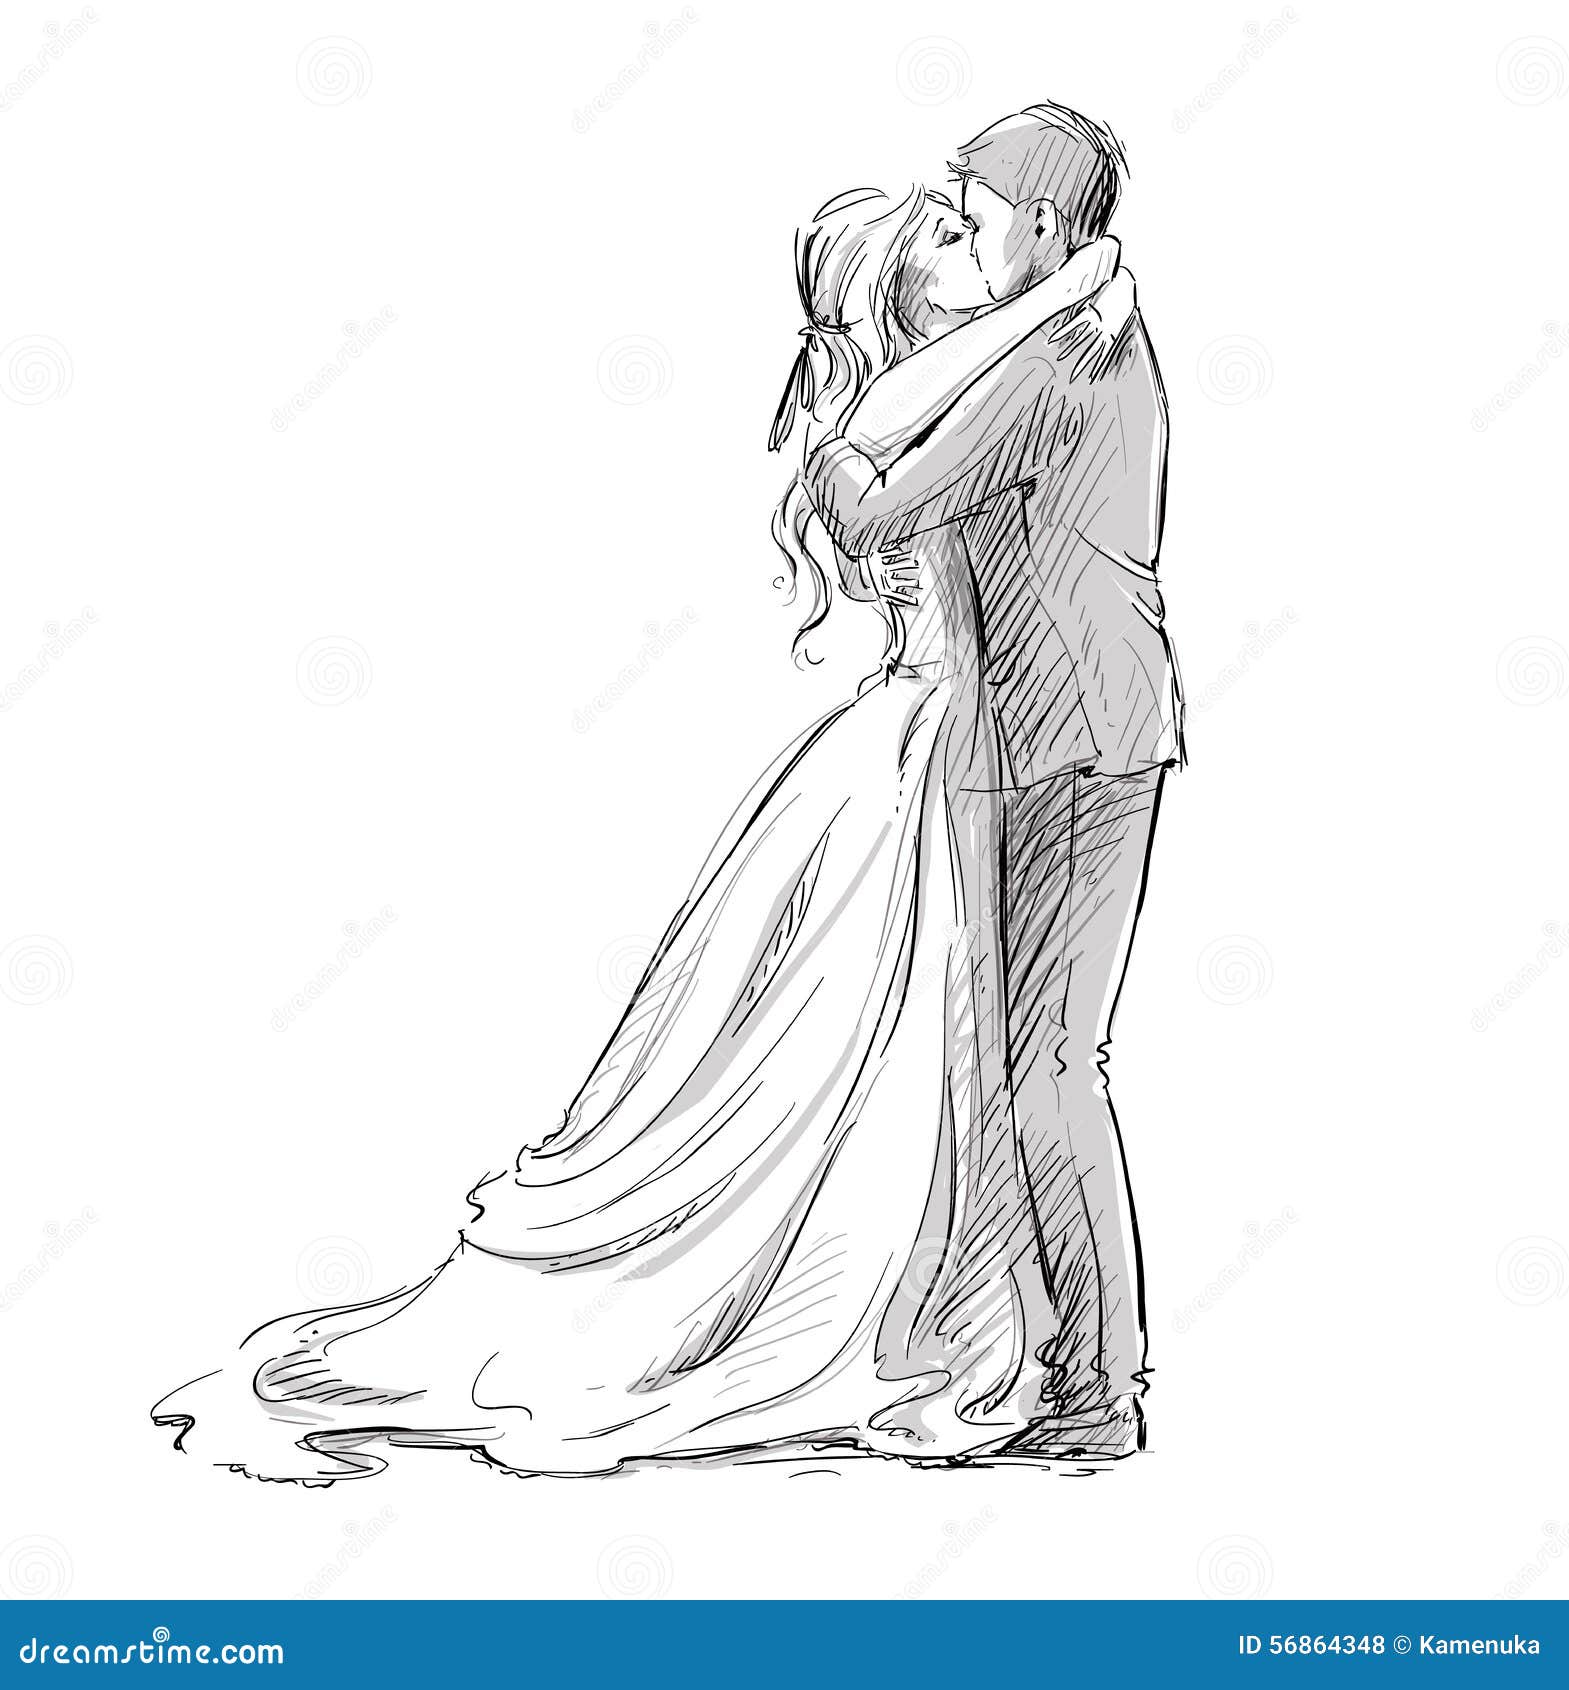 760 Illustrations ~ Just Married ideas | just married, wedding  illustration, illustration